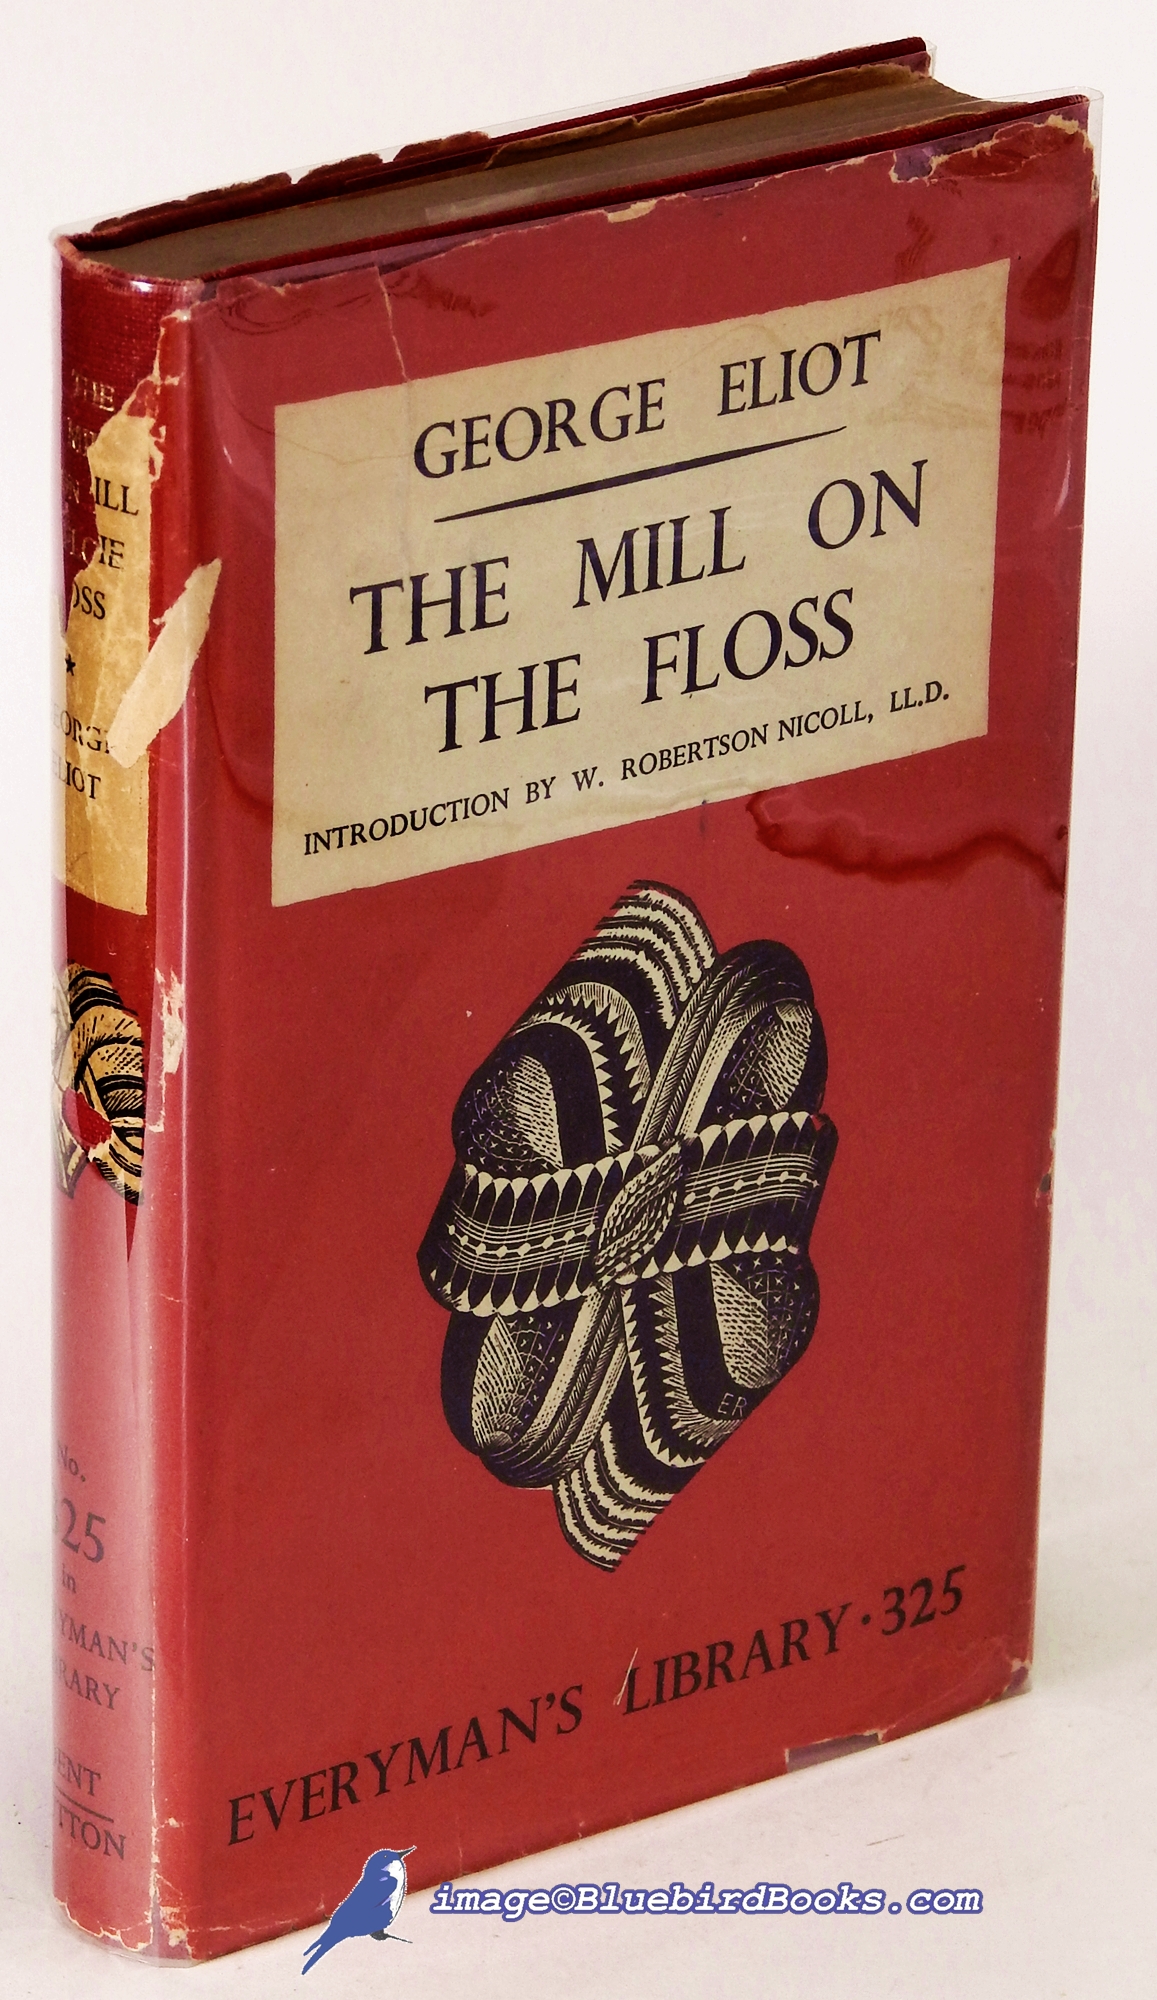 ELIOT, GEORGE (EVANS, MARY ANN) - The MILL on the Floss (Everyman's Library #325)